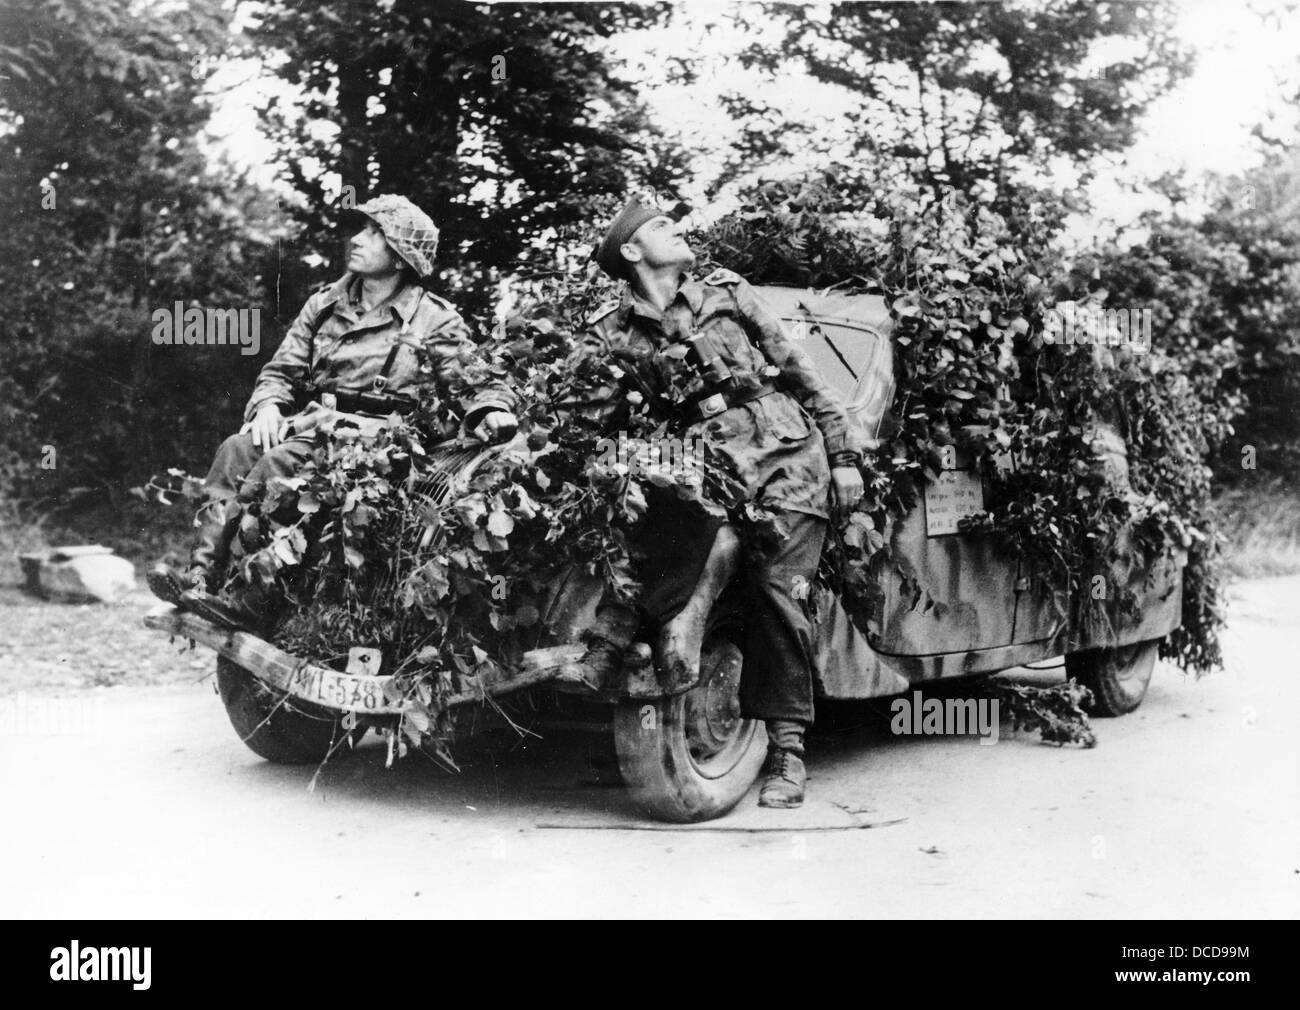 Members of the German Wehrmacht are pictured in front of a camouflaged ...